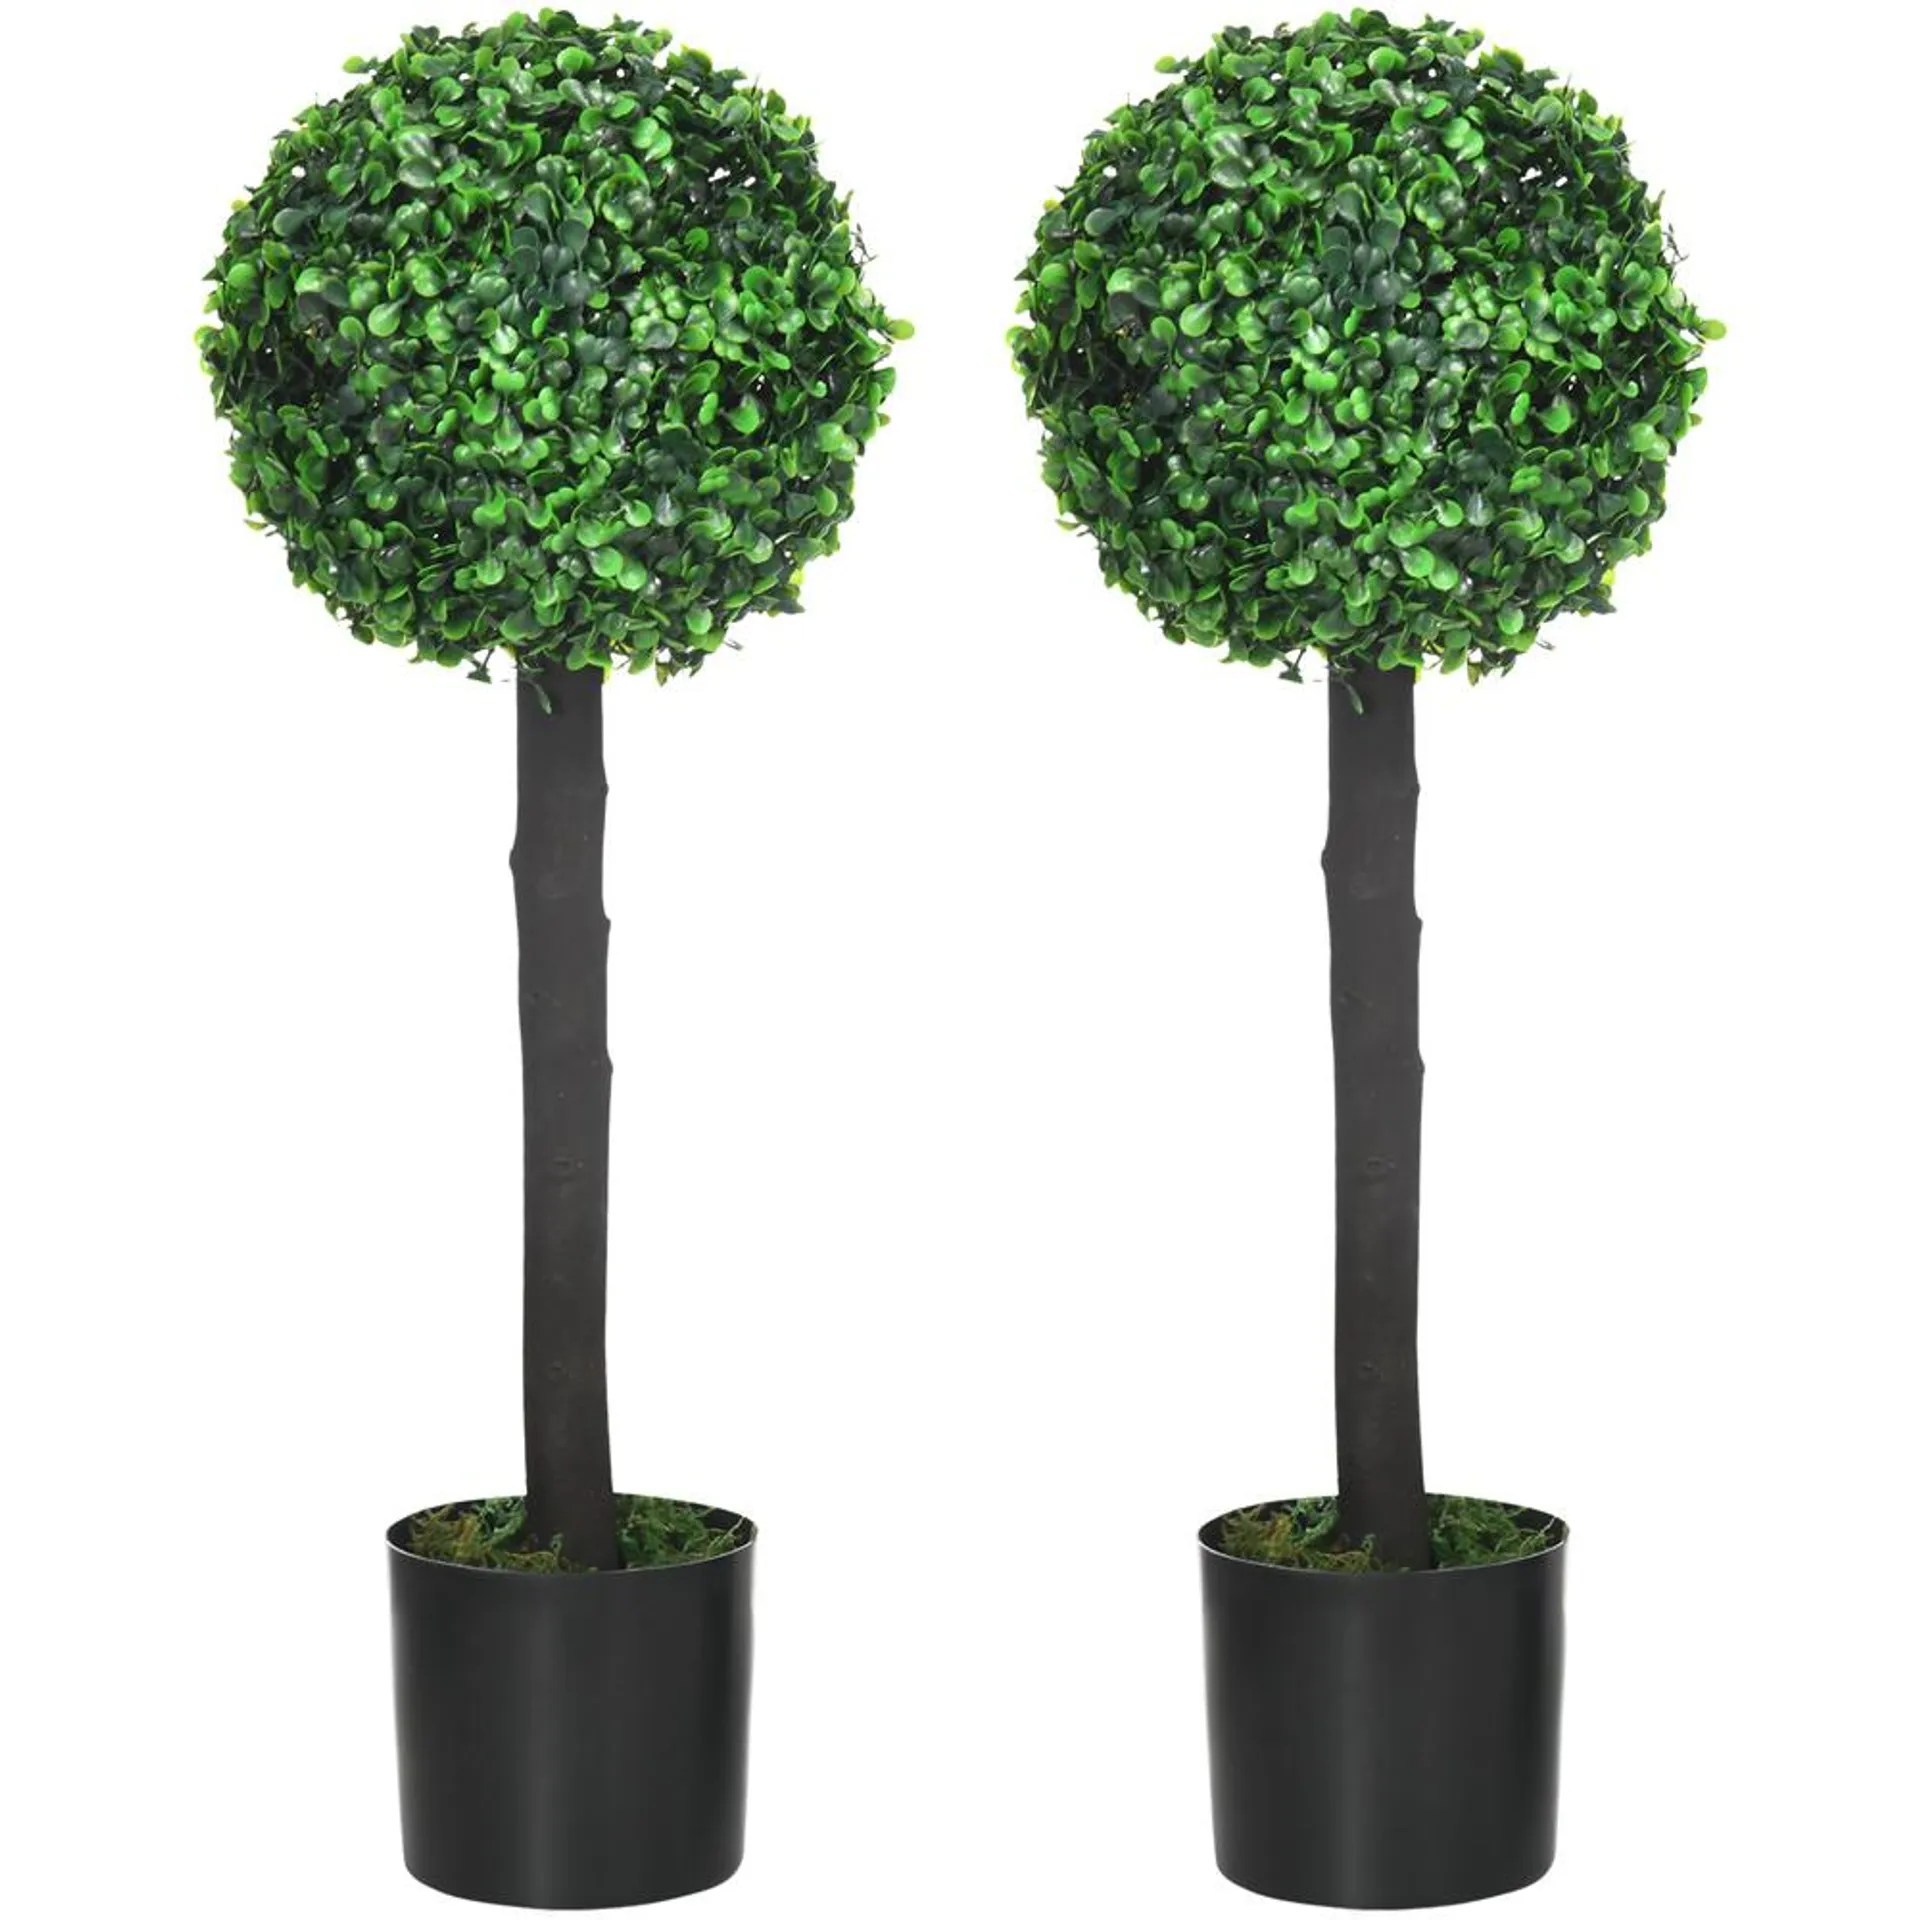 Portland Boxwood Ball Tree Artificial Plant In Pot 2ft 2 Pack